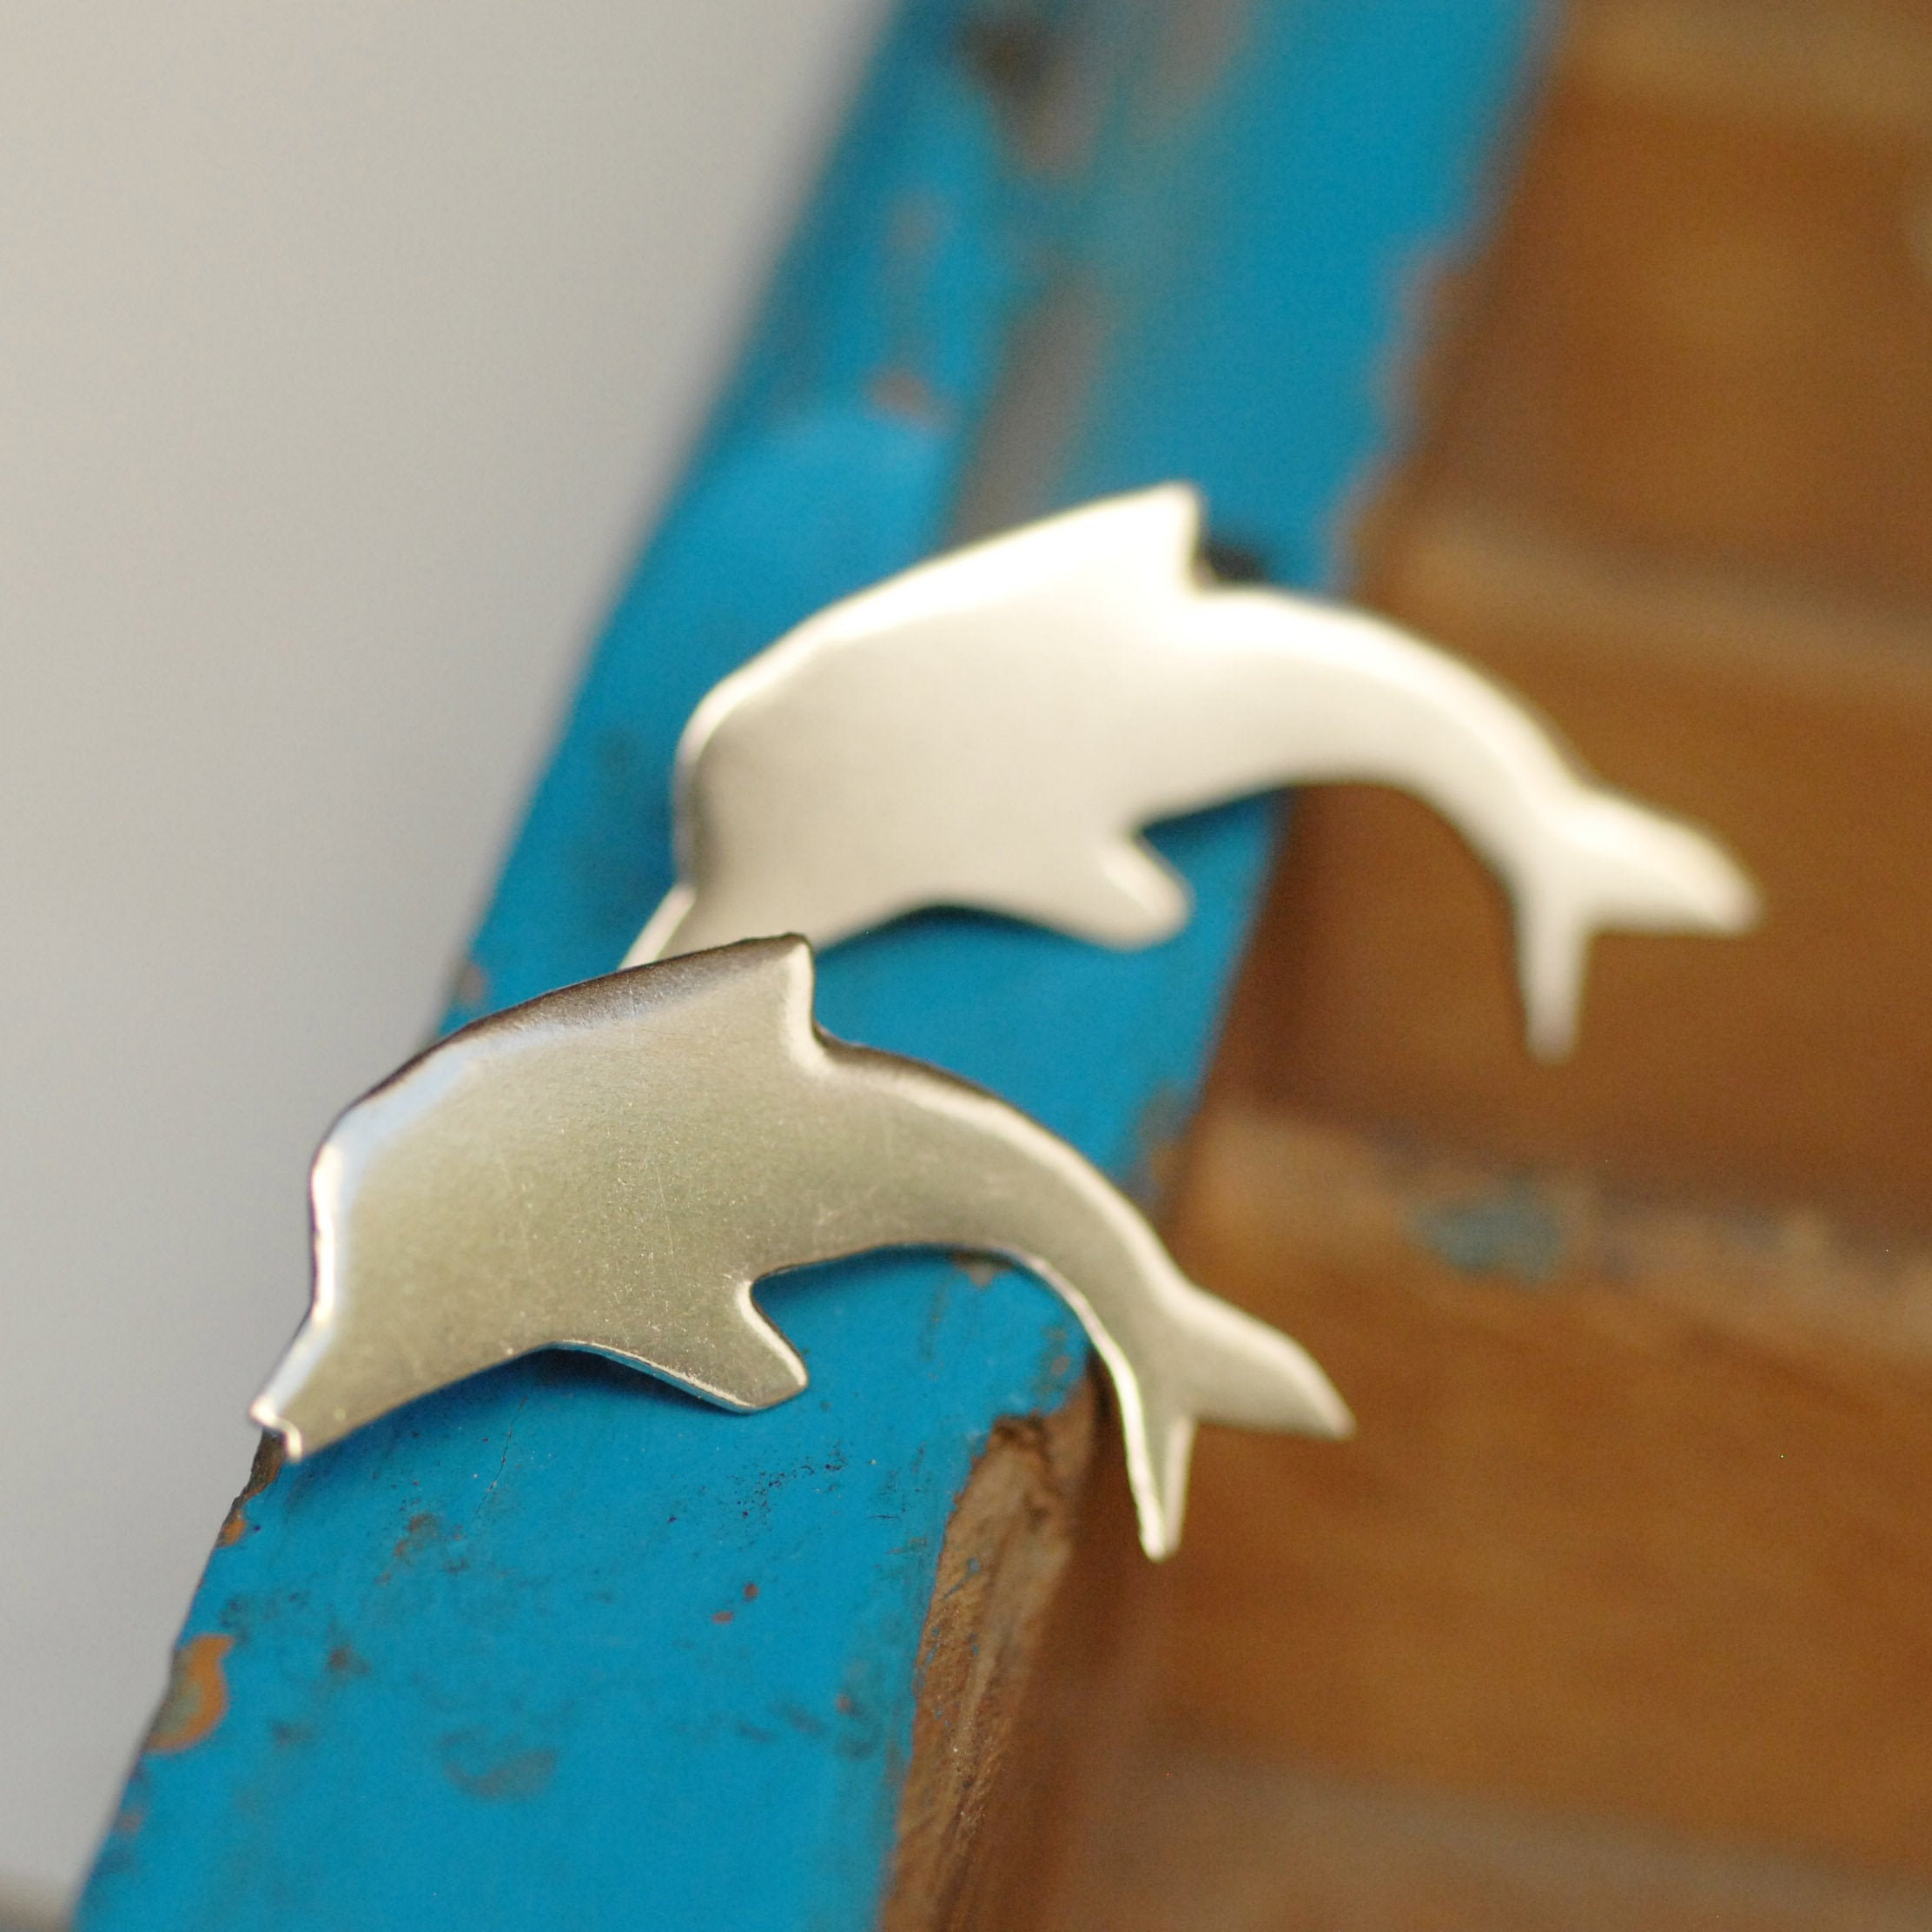 Dolphin Shapes 33mm x 22mm Metal Blanks - Solid Copper